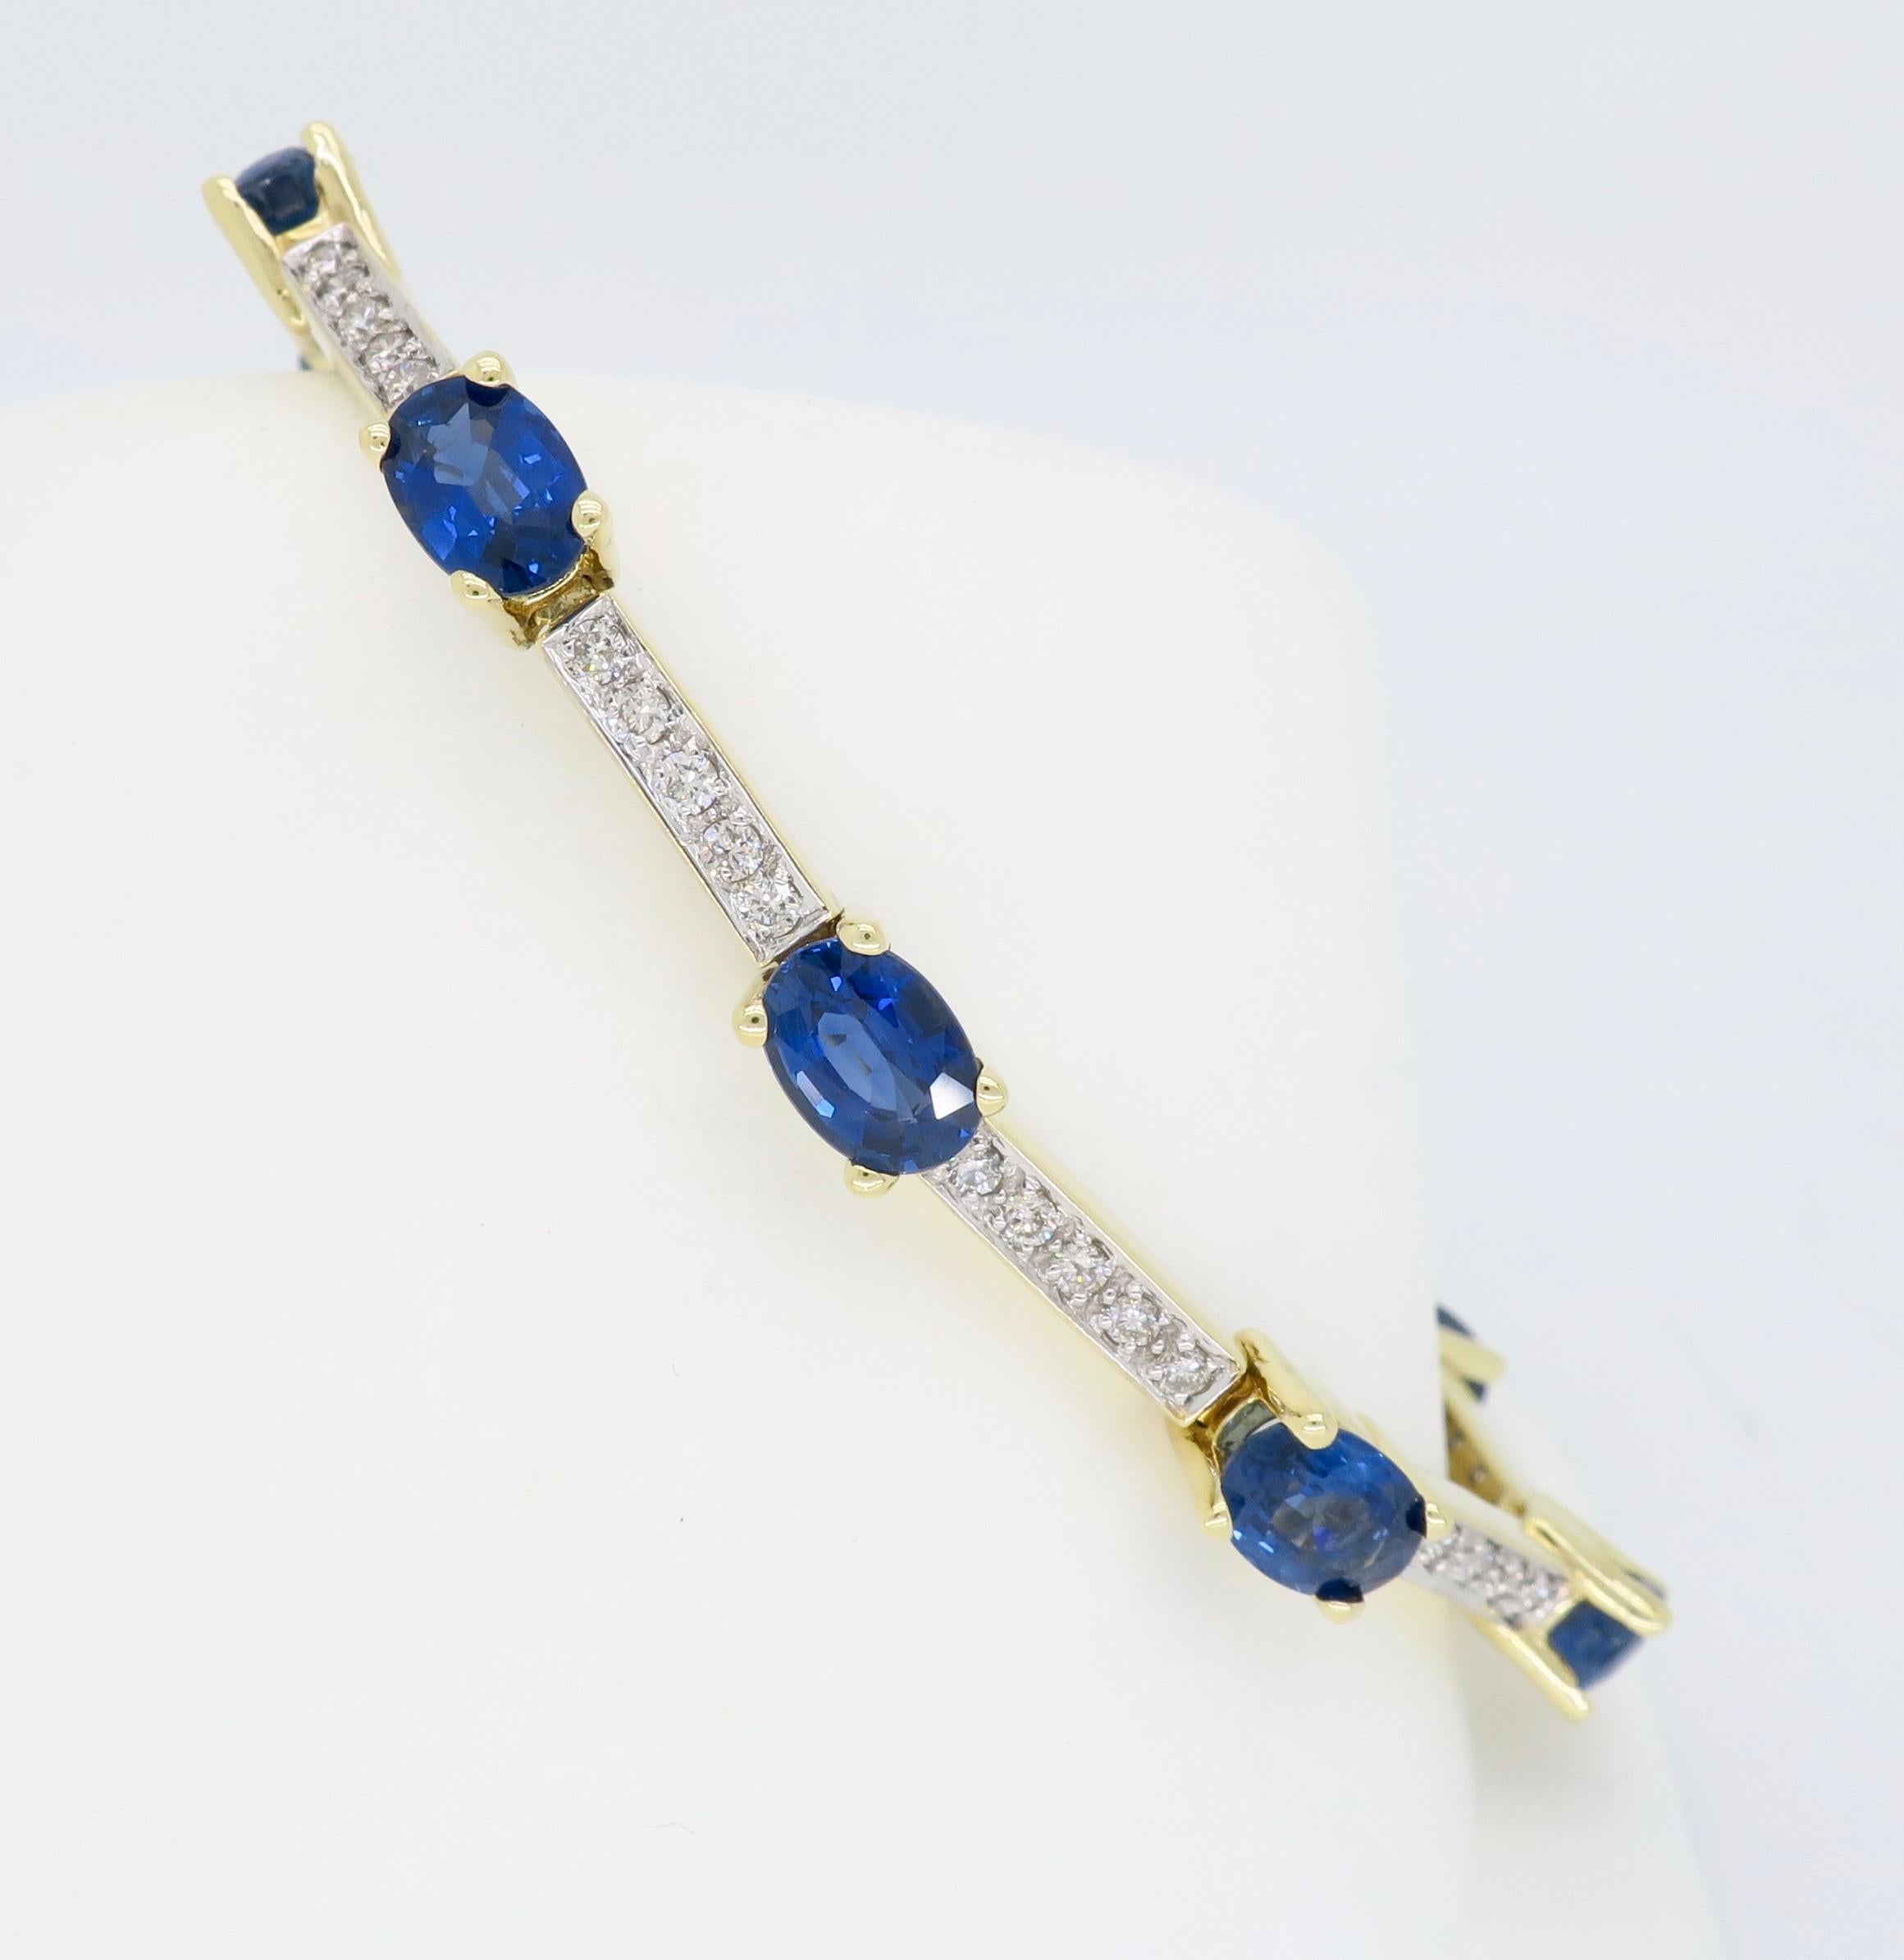 Bar link blue sapphire and diamond tennis bracelet crafted in 14k yellow gold.

Gemstone Carat Weight: Approximately 11.06 CTW Blue Sapphires
Diamond Carat Weight:  Approximately .96CTW
Diamond Cut: Round Brilliant Cut
Color: Average G-I
Clarity: